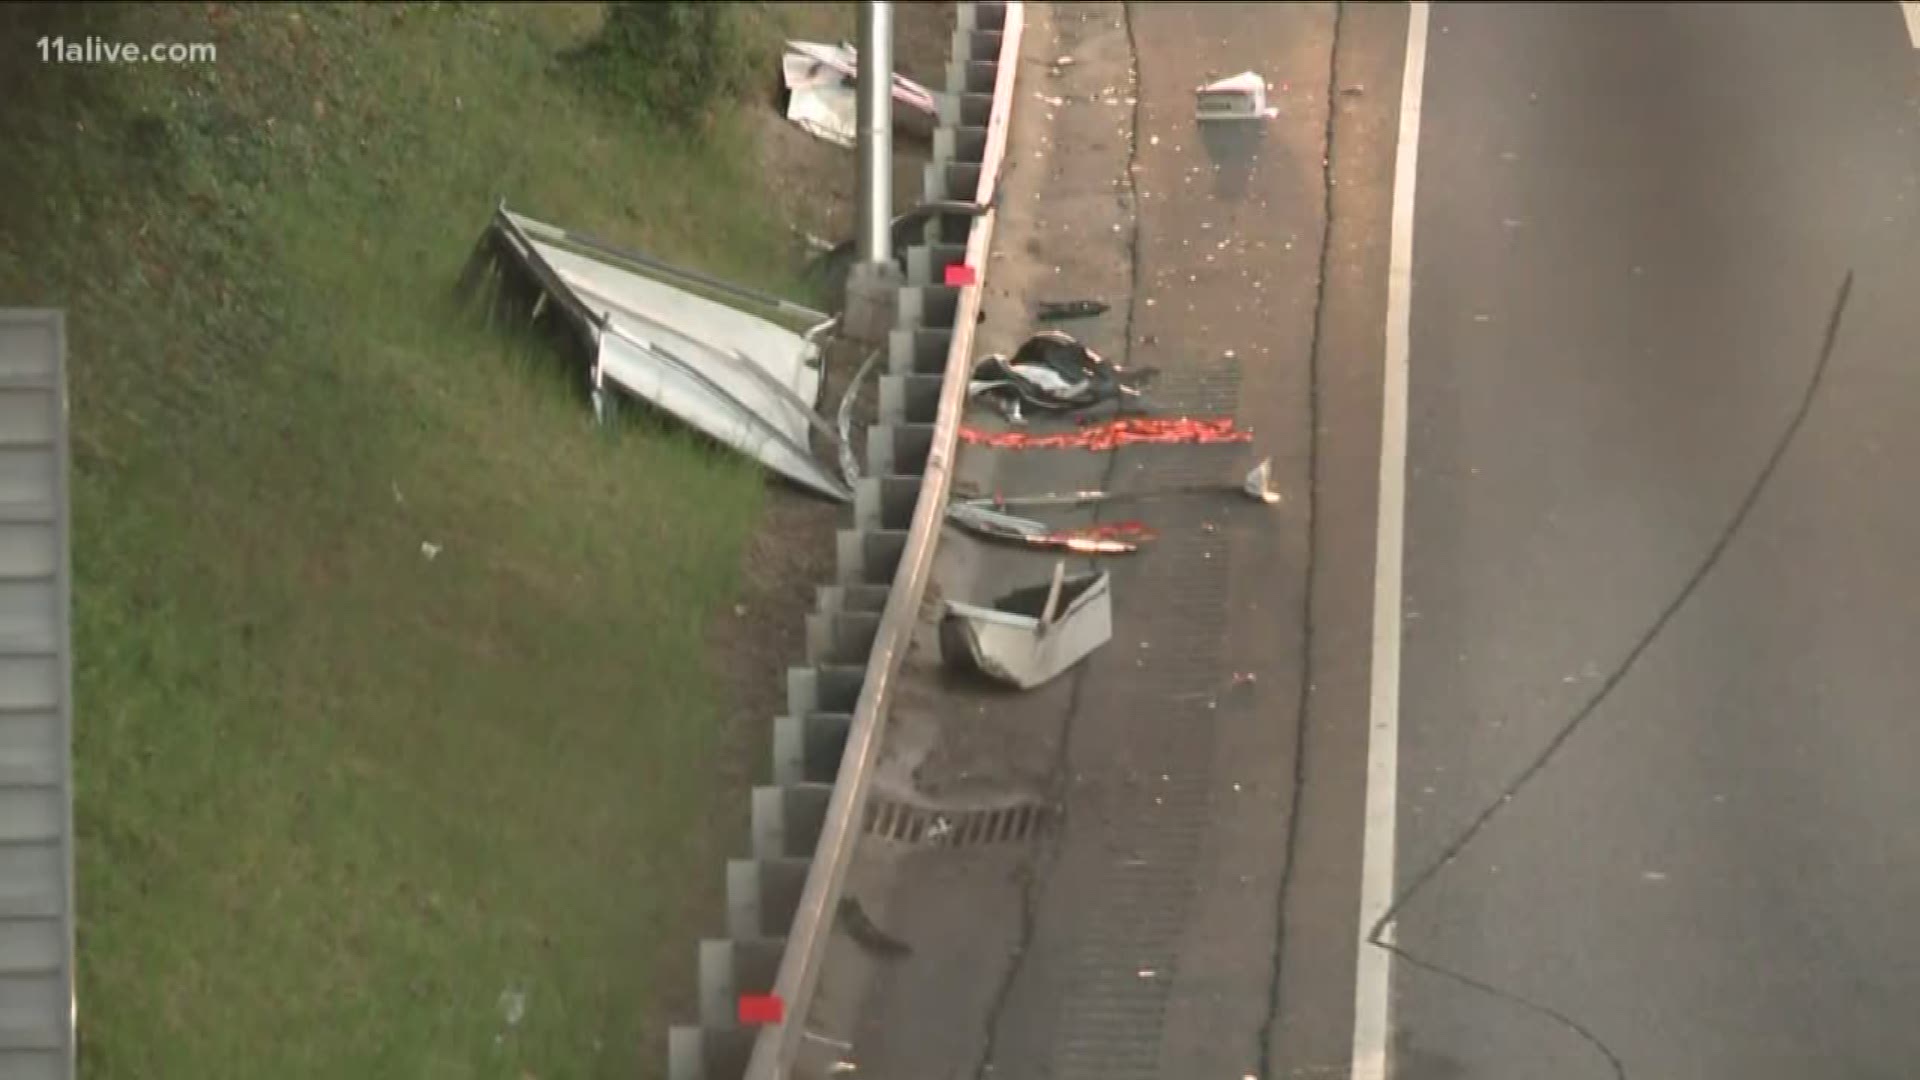 Officials say a camper top was in the middle of the road and then someone crashed into it.